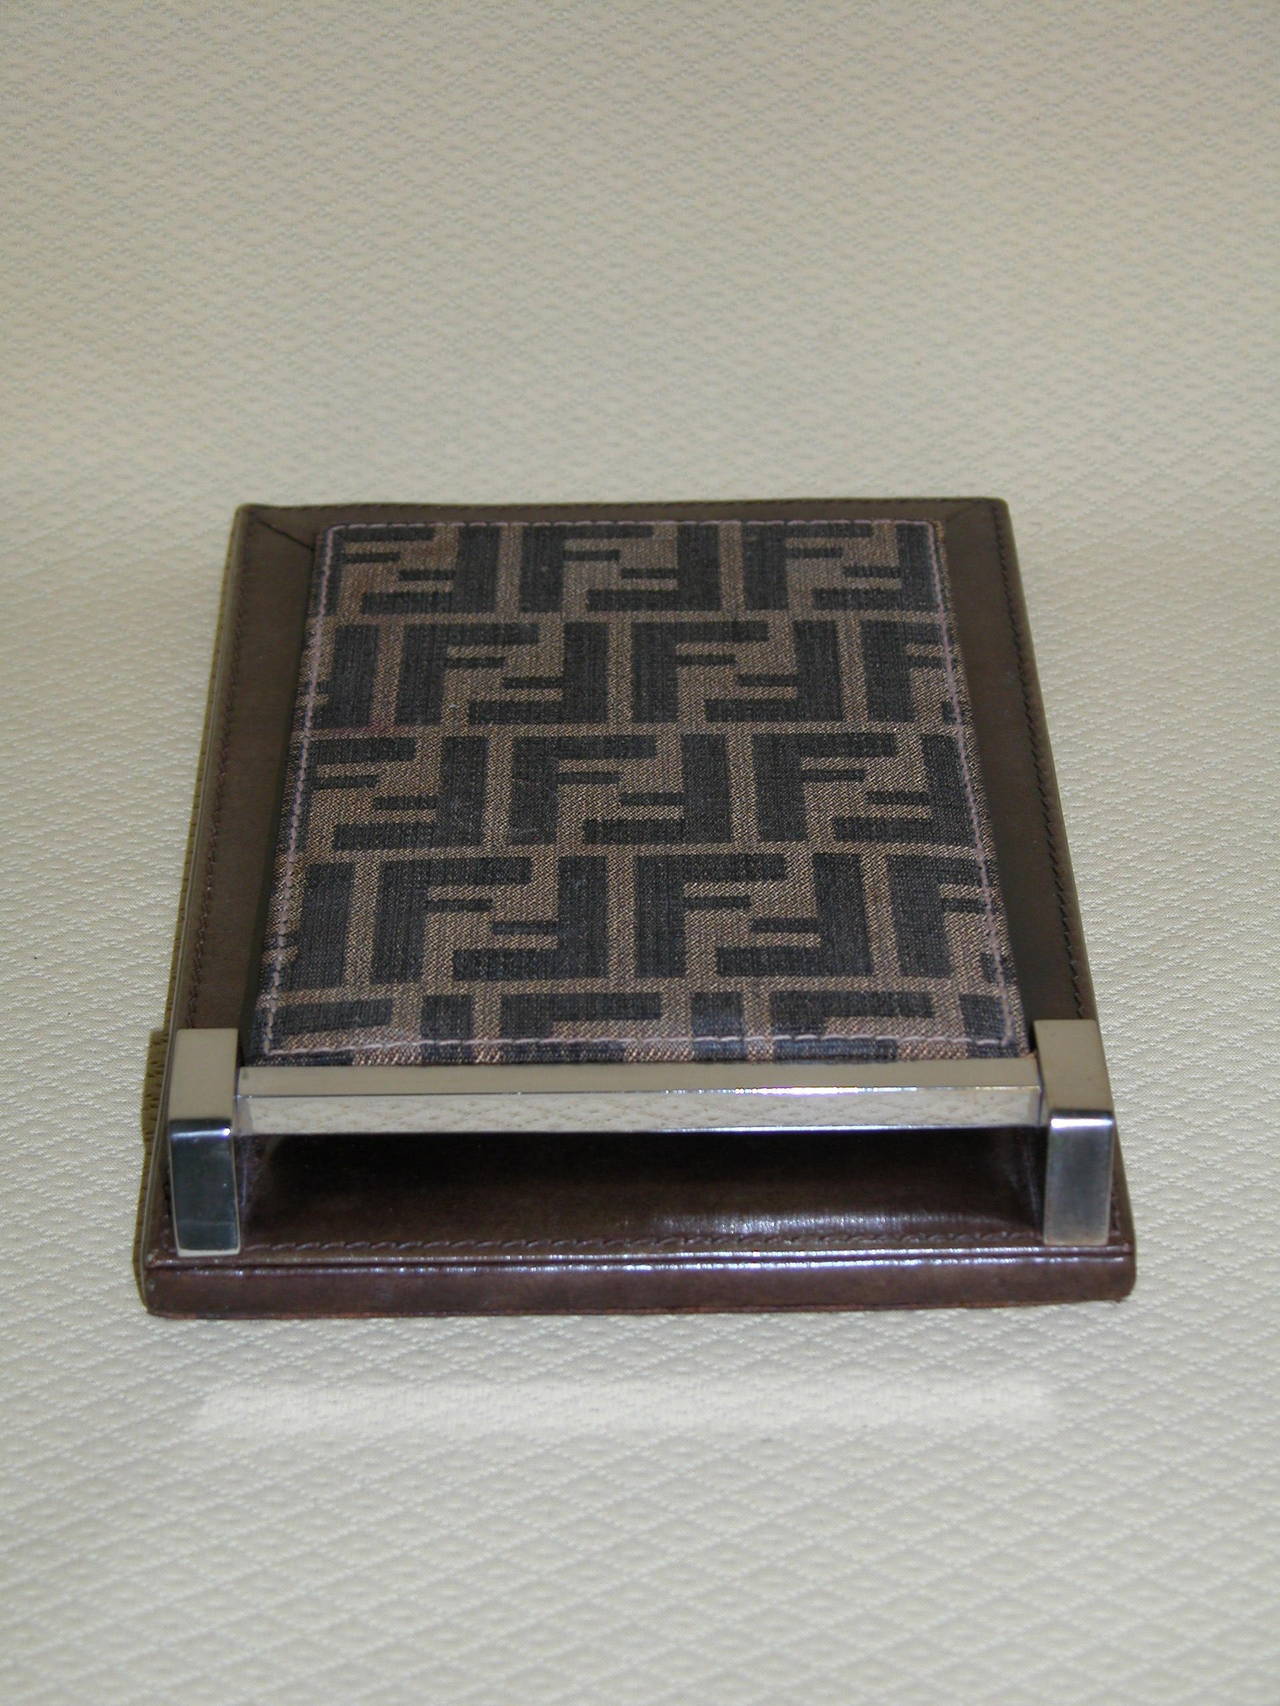 This genuine Fendi brand notepad holder was purchased in the early 70's and has been completely cleaned and has new soft brown leather applied on the underneath. It measures 6